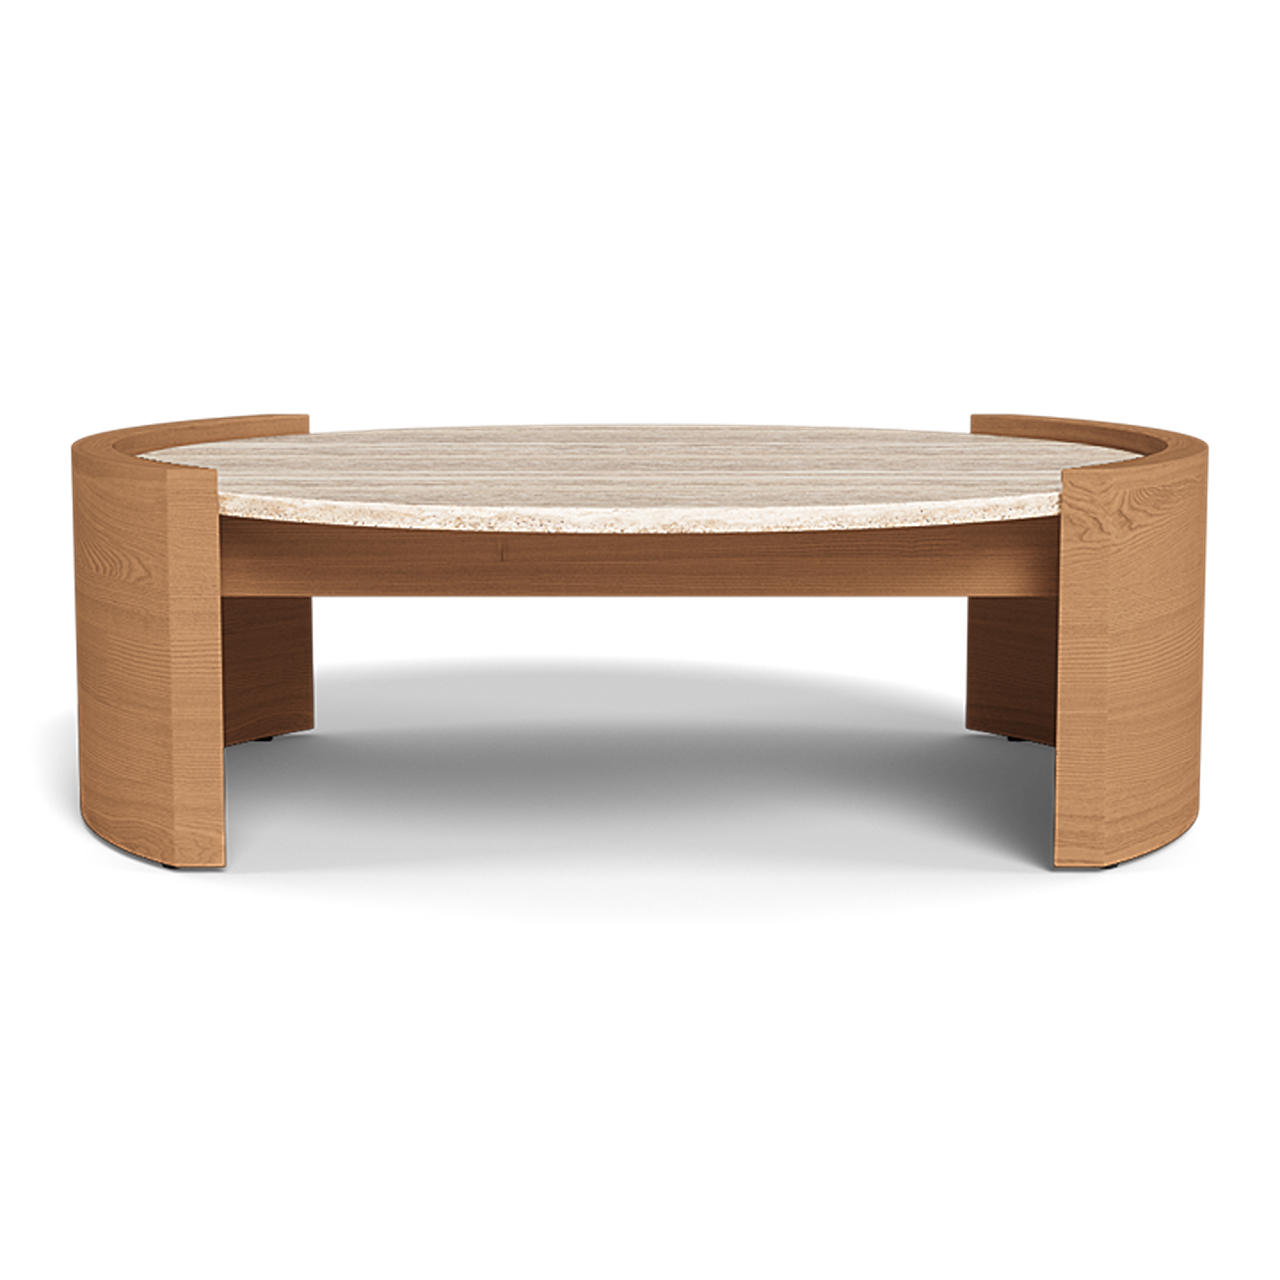 Catalina Outdoor Round Coffee Table